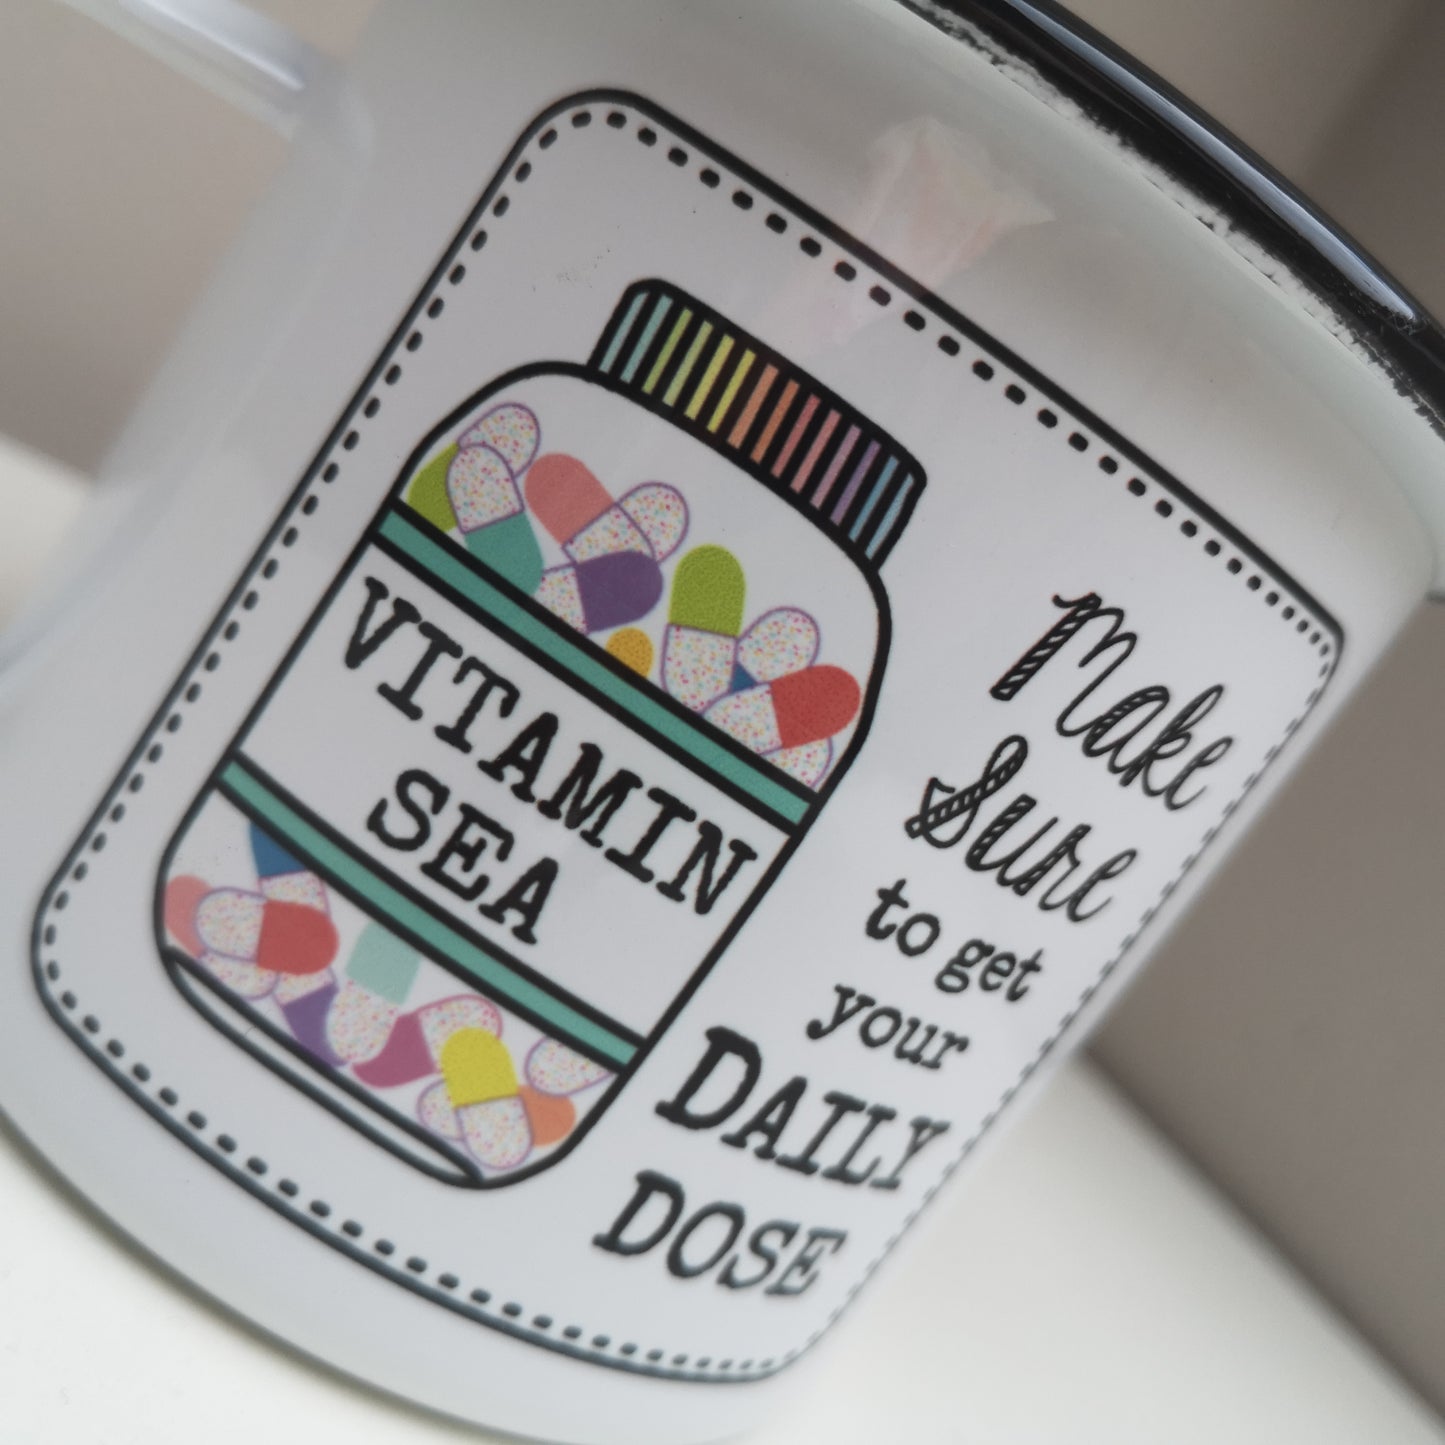 A close up photo of a White enamel mug with a black rim with the following on the front - a framed hand drawn image of a vitamin jar filled with brightly coloured pills and text to the right of it that says "make Sure to get your daily dose". The bottle has a VITAMIN SEA label on it.